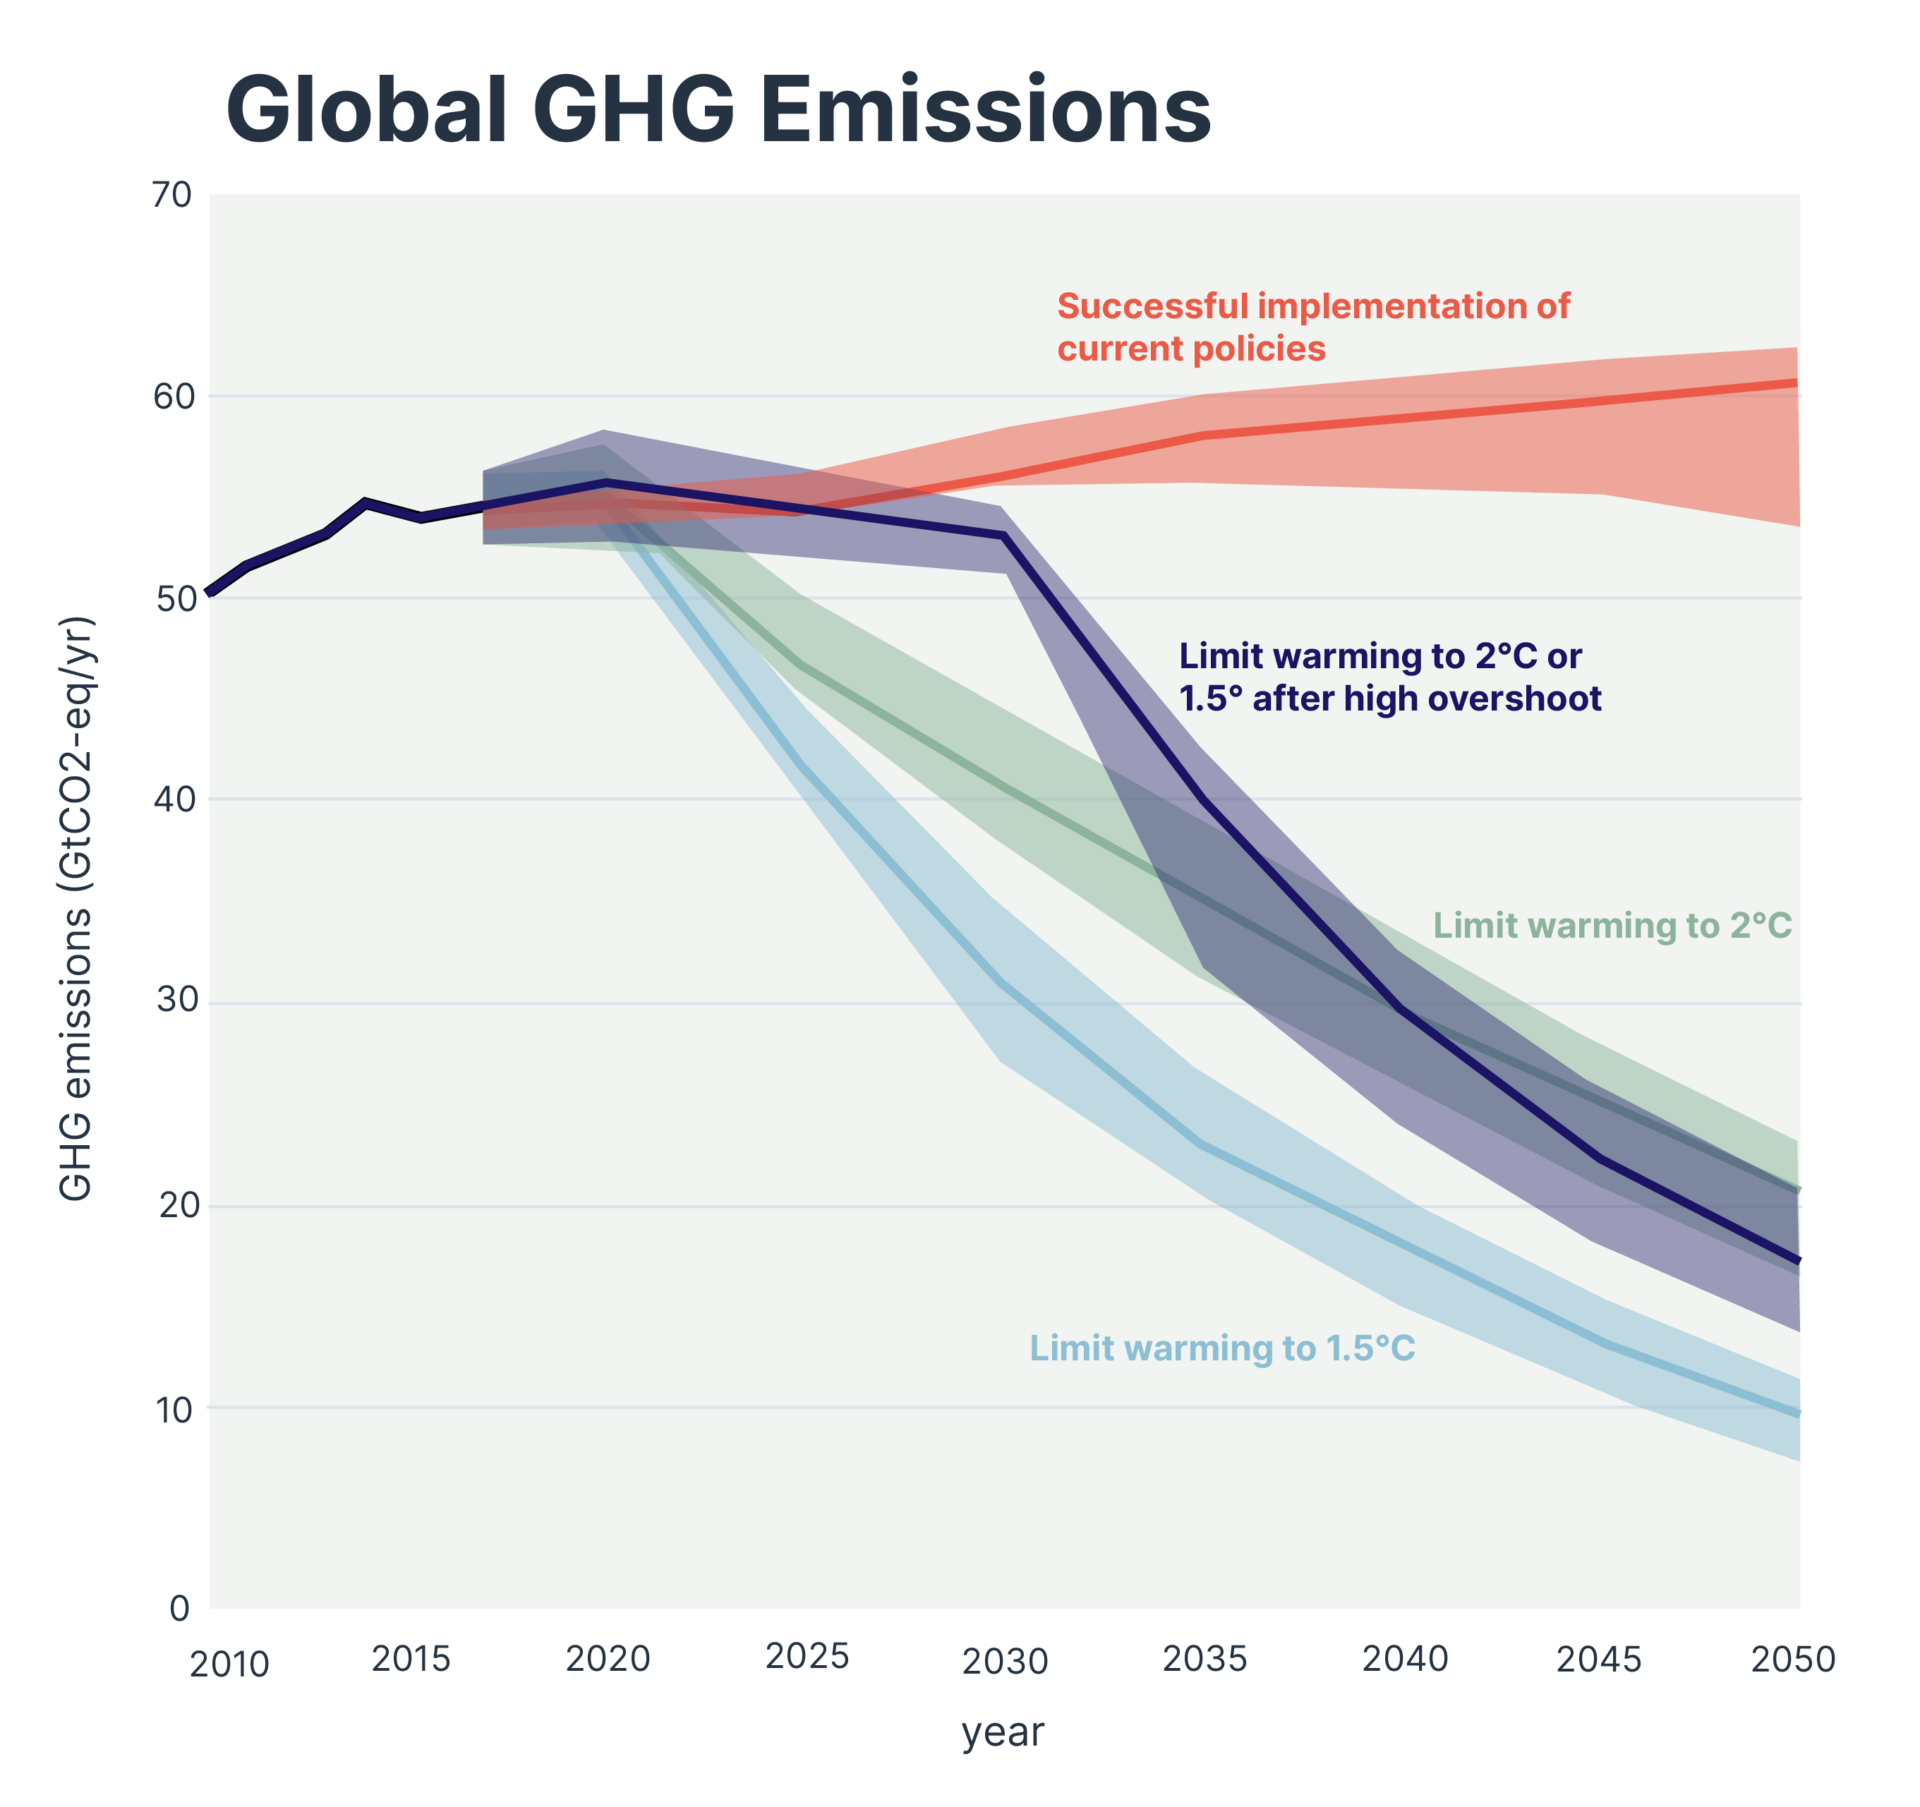 A graph of IPCC data showing global greenhouse gas emissions trajectories under several scenarios (current policies, 1.5°C with and without overshoot, and 2°C)